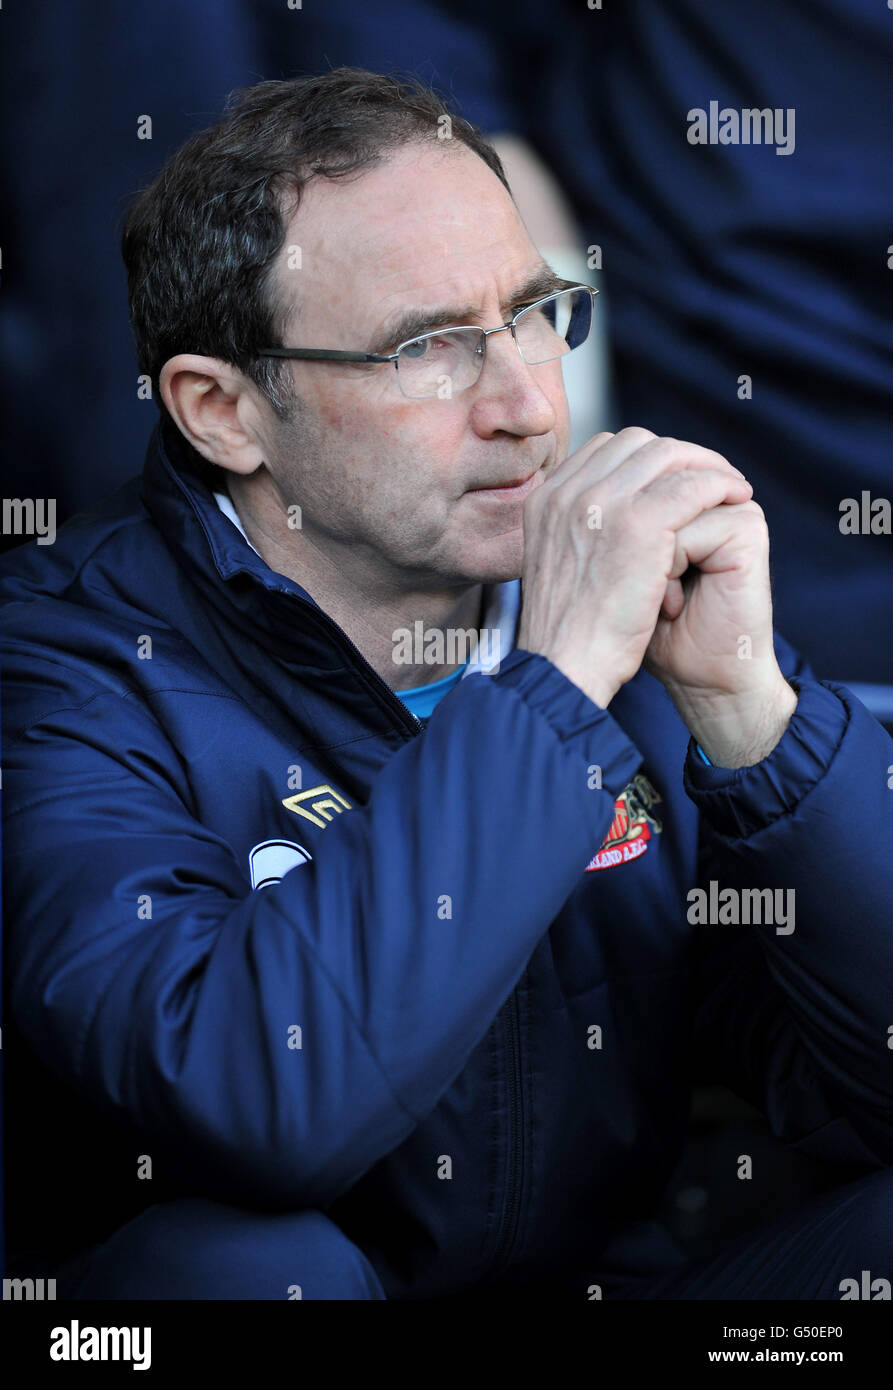 Sunderland manager Martin O'Neill looks ponderous before kick off of the Barclays Premier League match at The Hawthorns, West Bromwich. Stock Photo